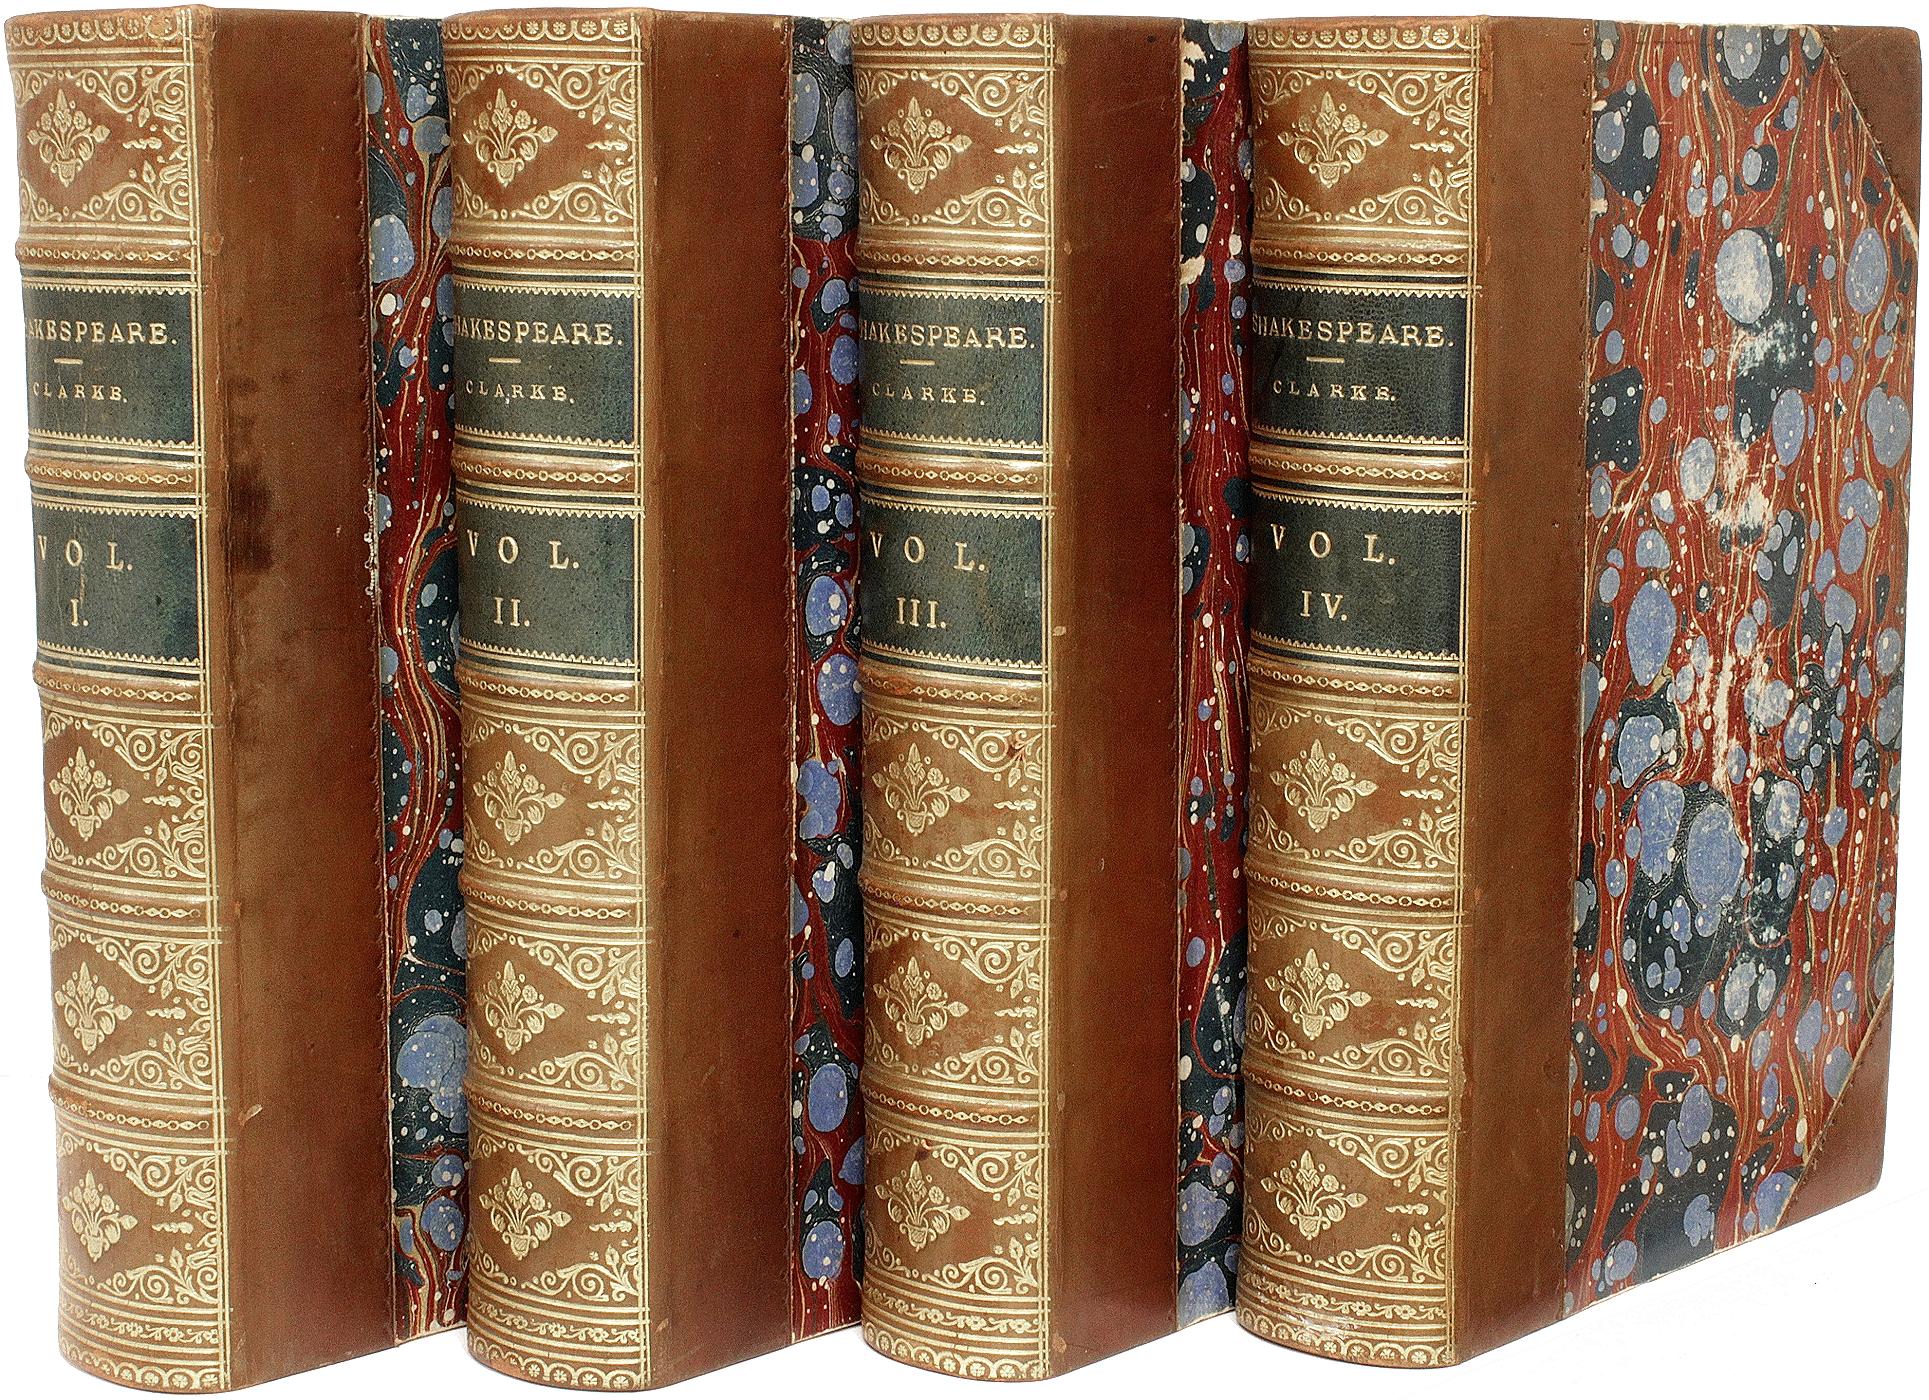 Late 19th Century The Works Of William Shakespeare - 4 vols. - 1881 - IN A FINE LEATHER BINDING !